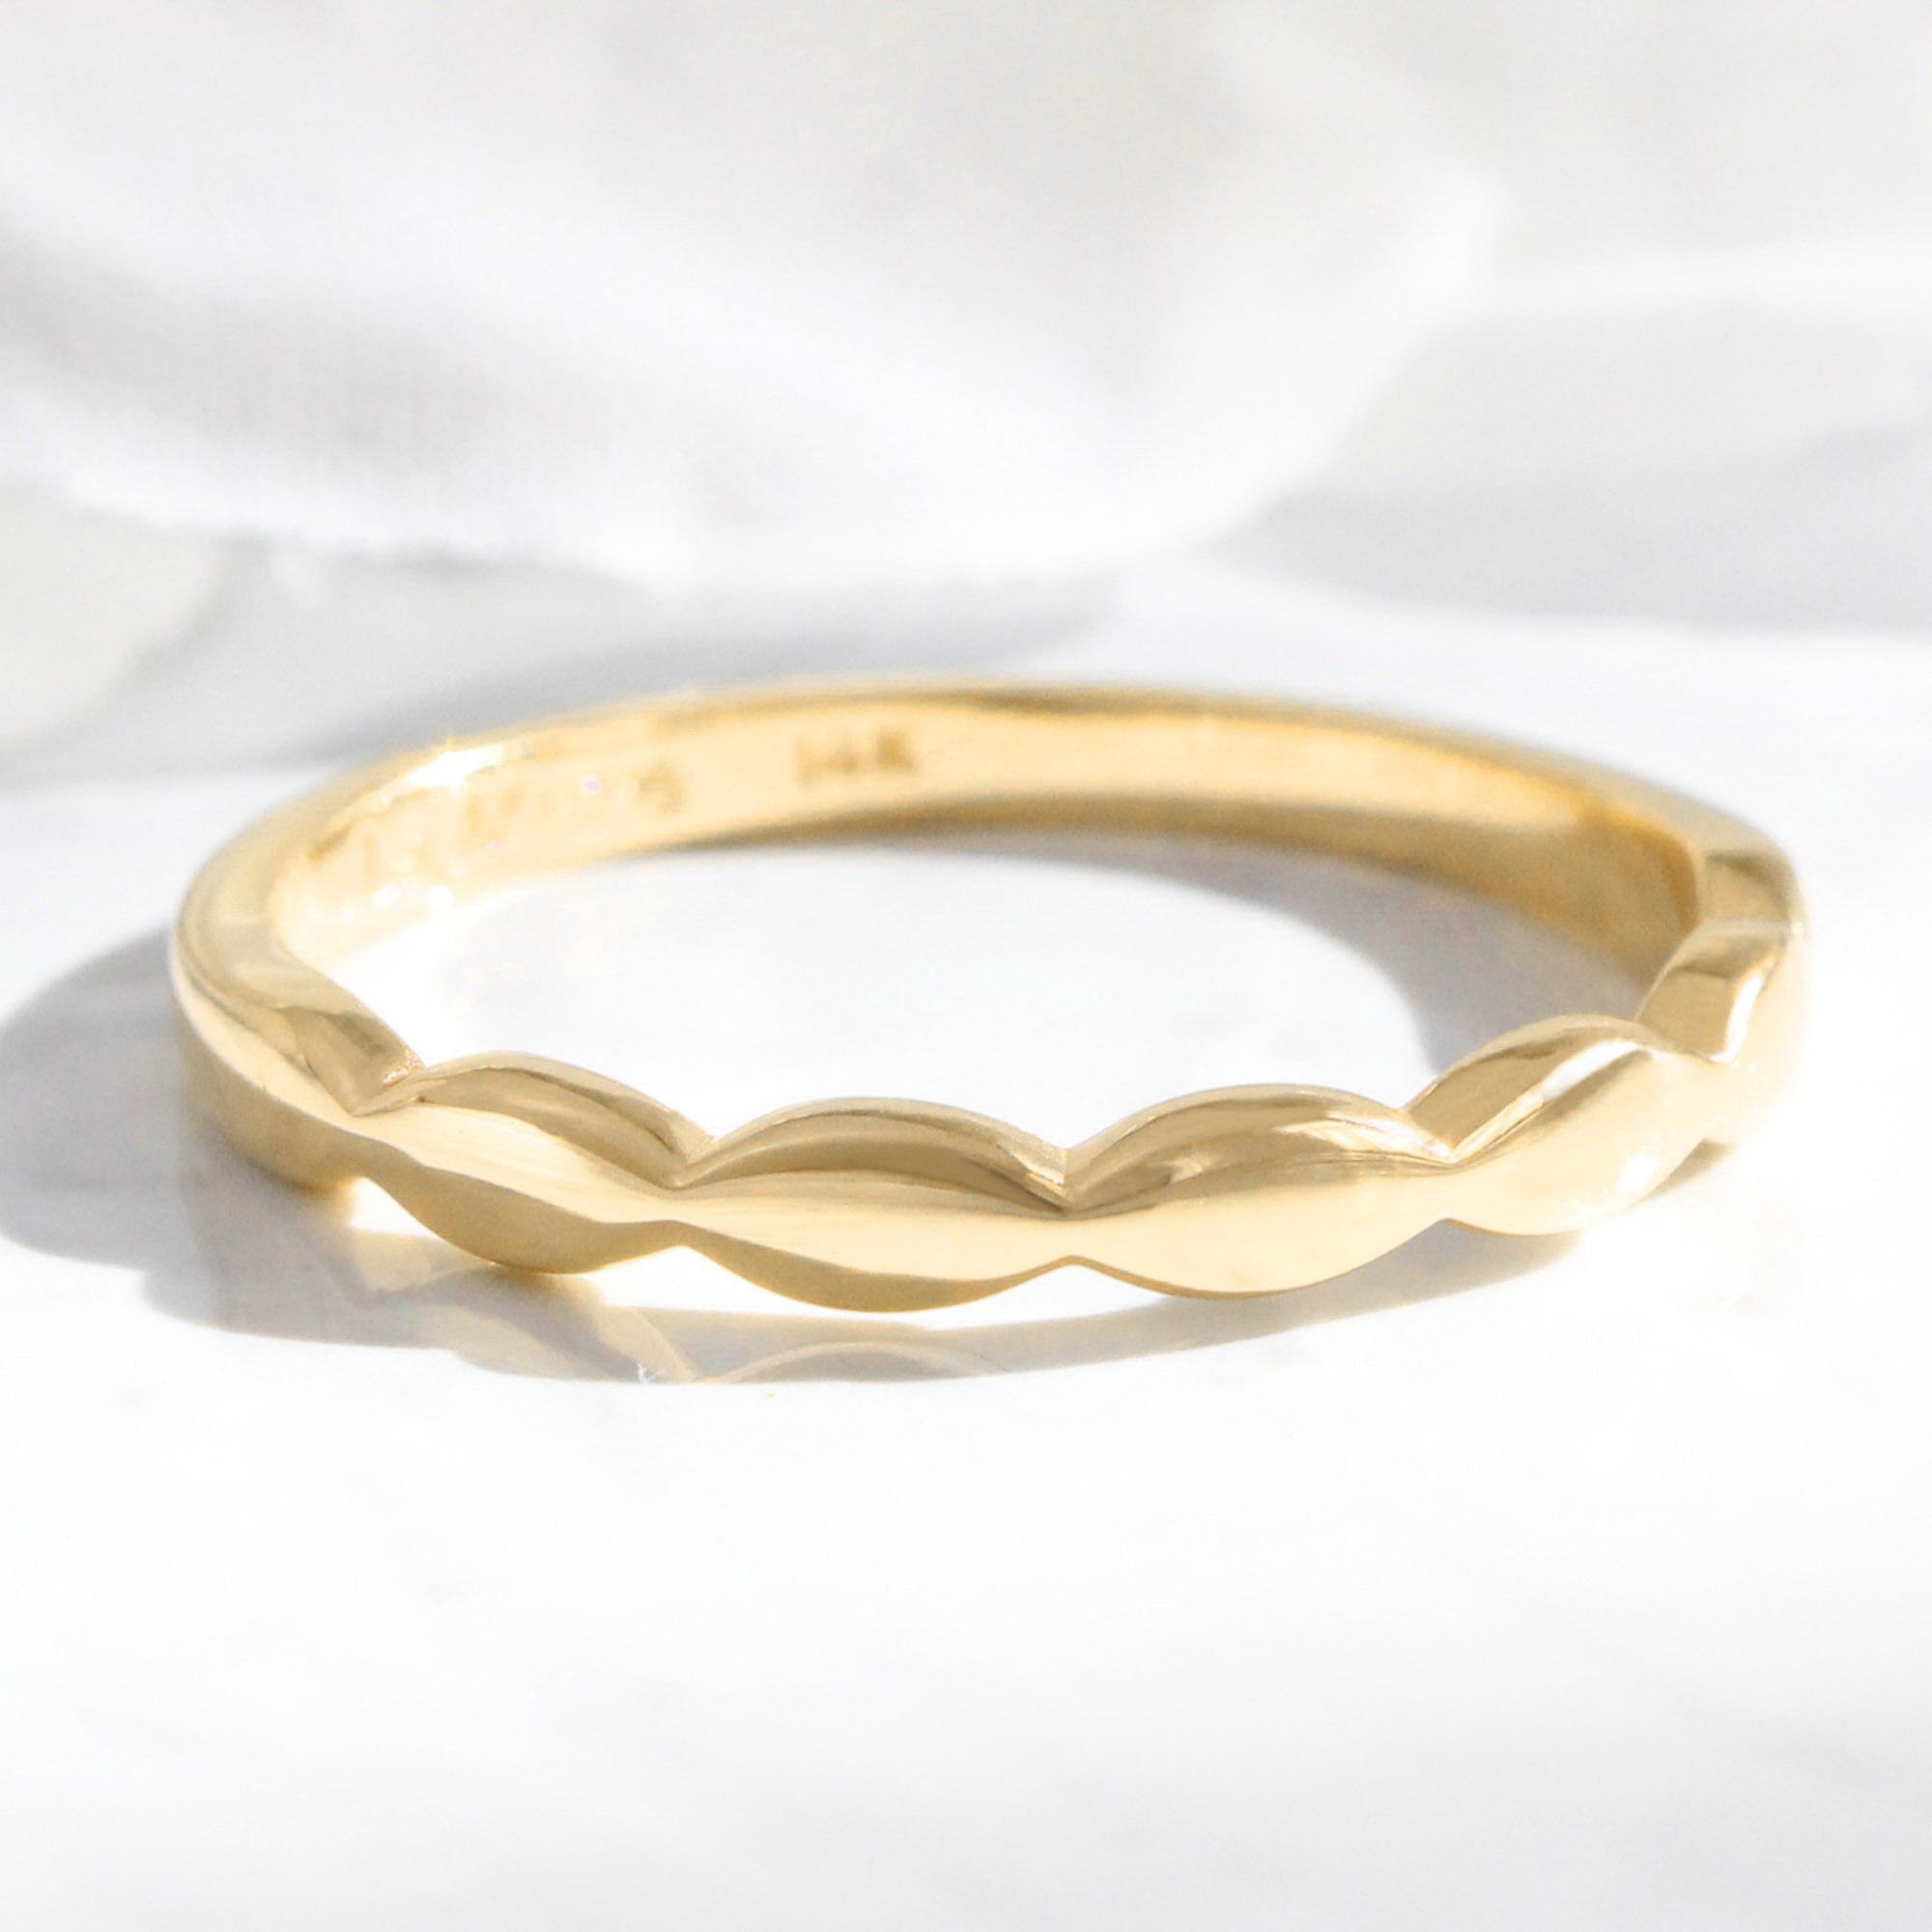 Unique gender neutral wedding ring, scalloped wedding band yellow gold anniversary ring la more design jewelry